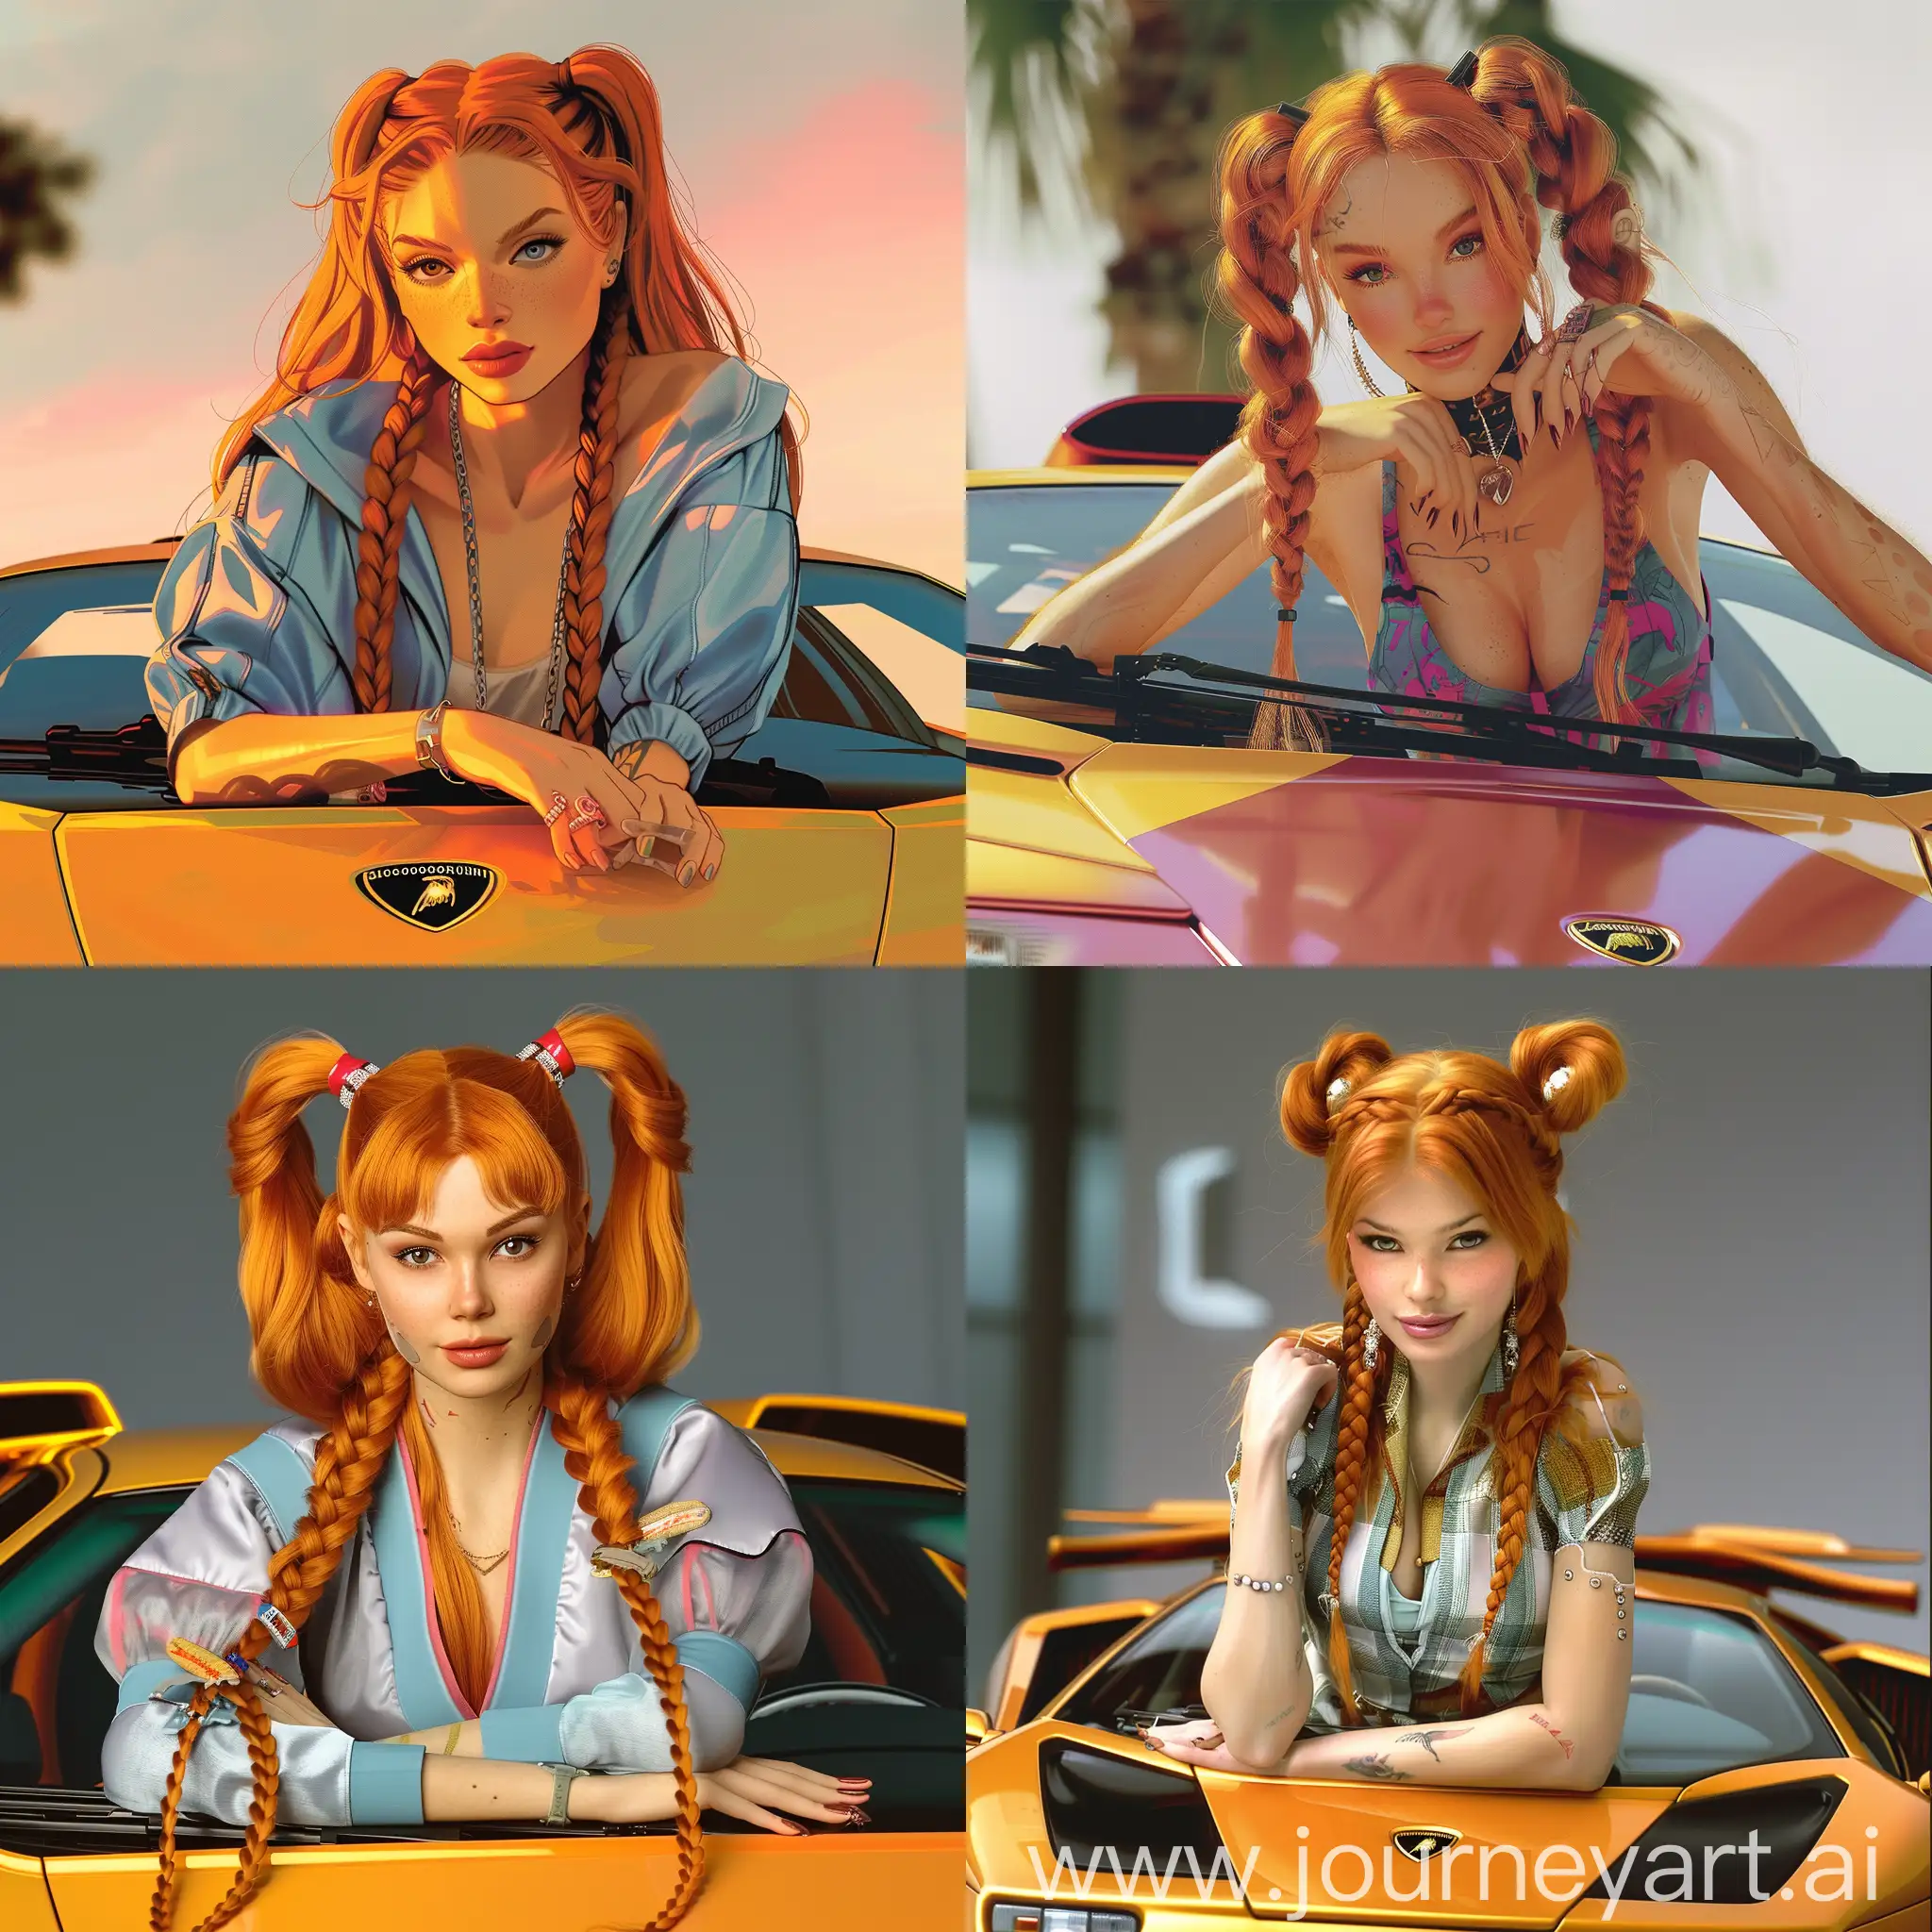 animated style, colorful and vibrant. A young 25 year old woman, attractive, with ginger hair in long double braids. Seductive outfit. She is leaning on a modern Lamborghini Diablo